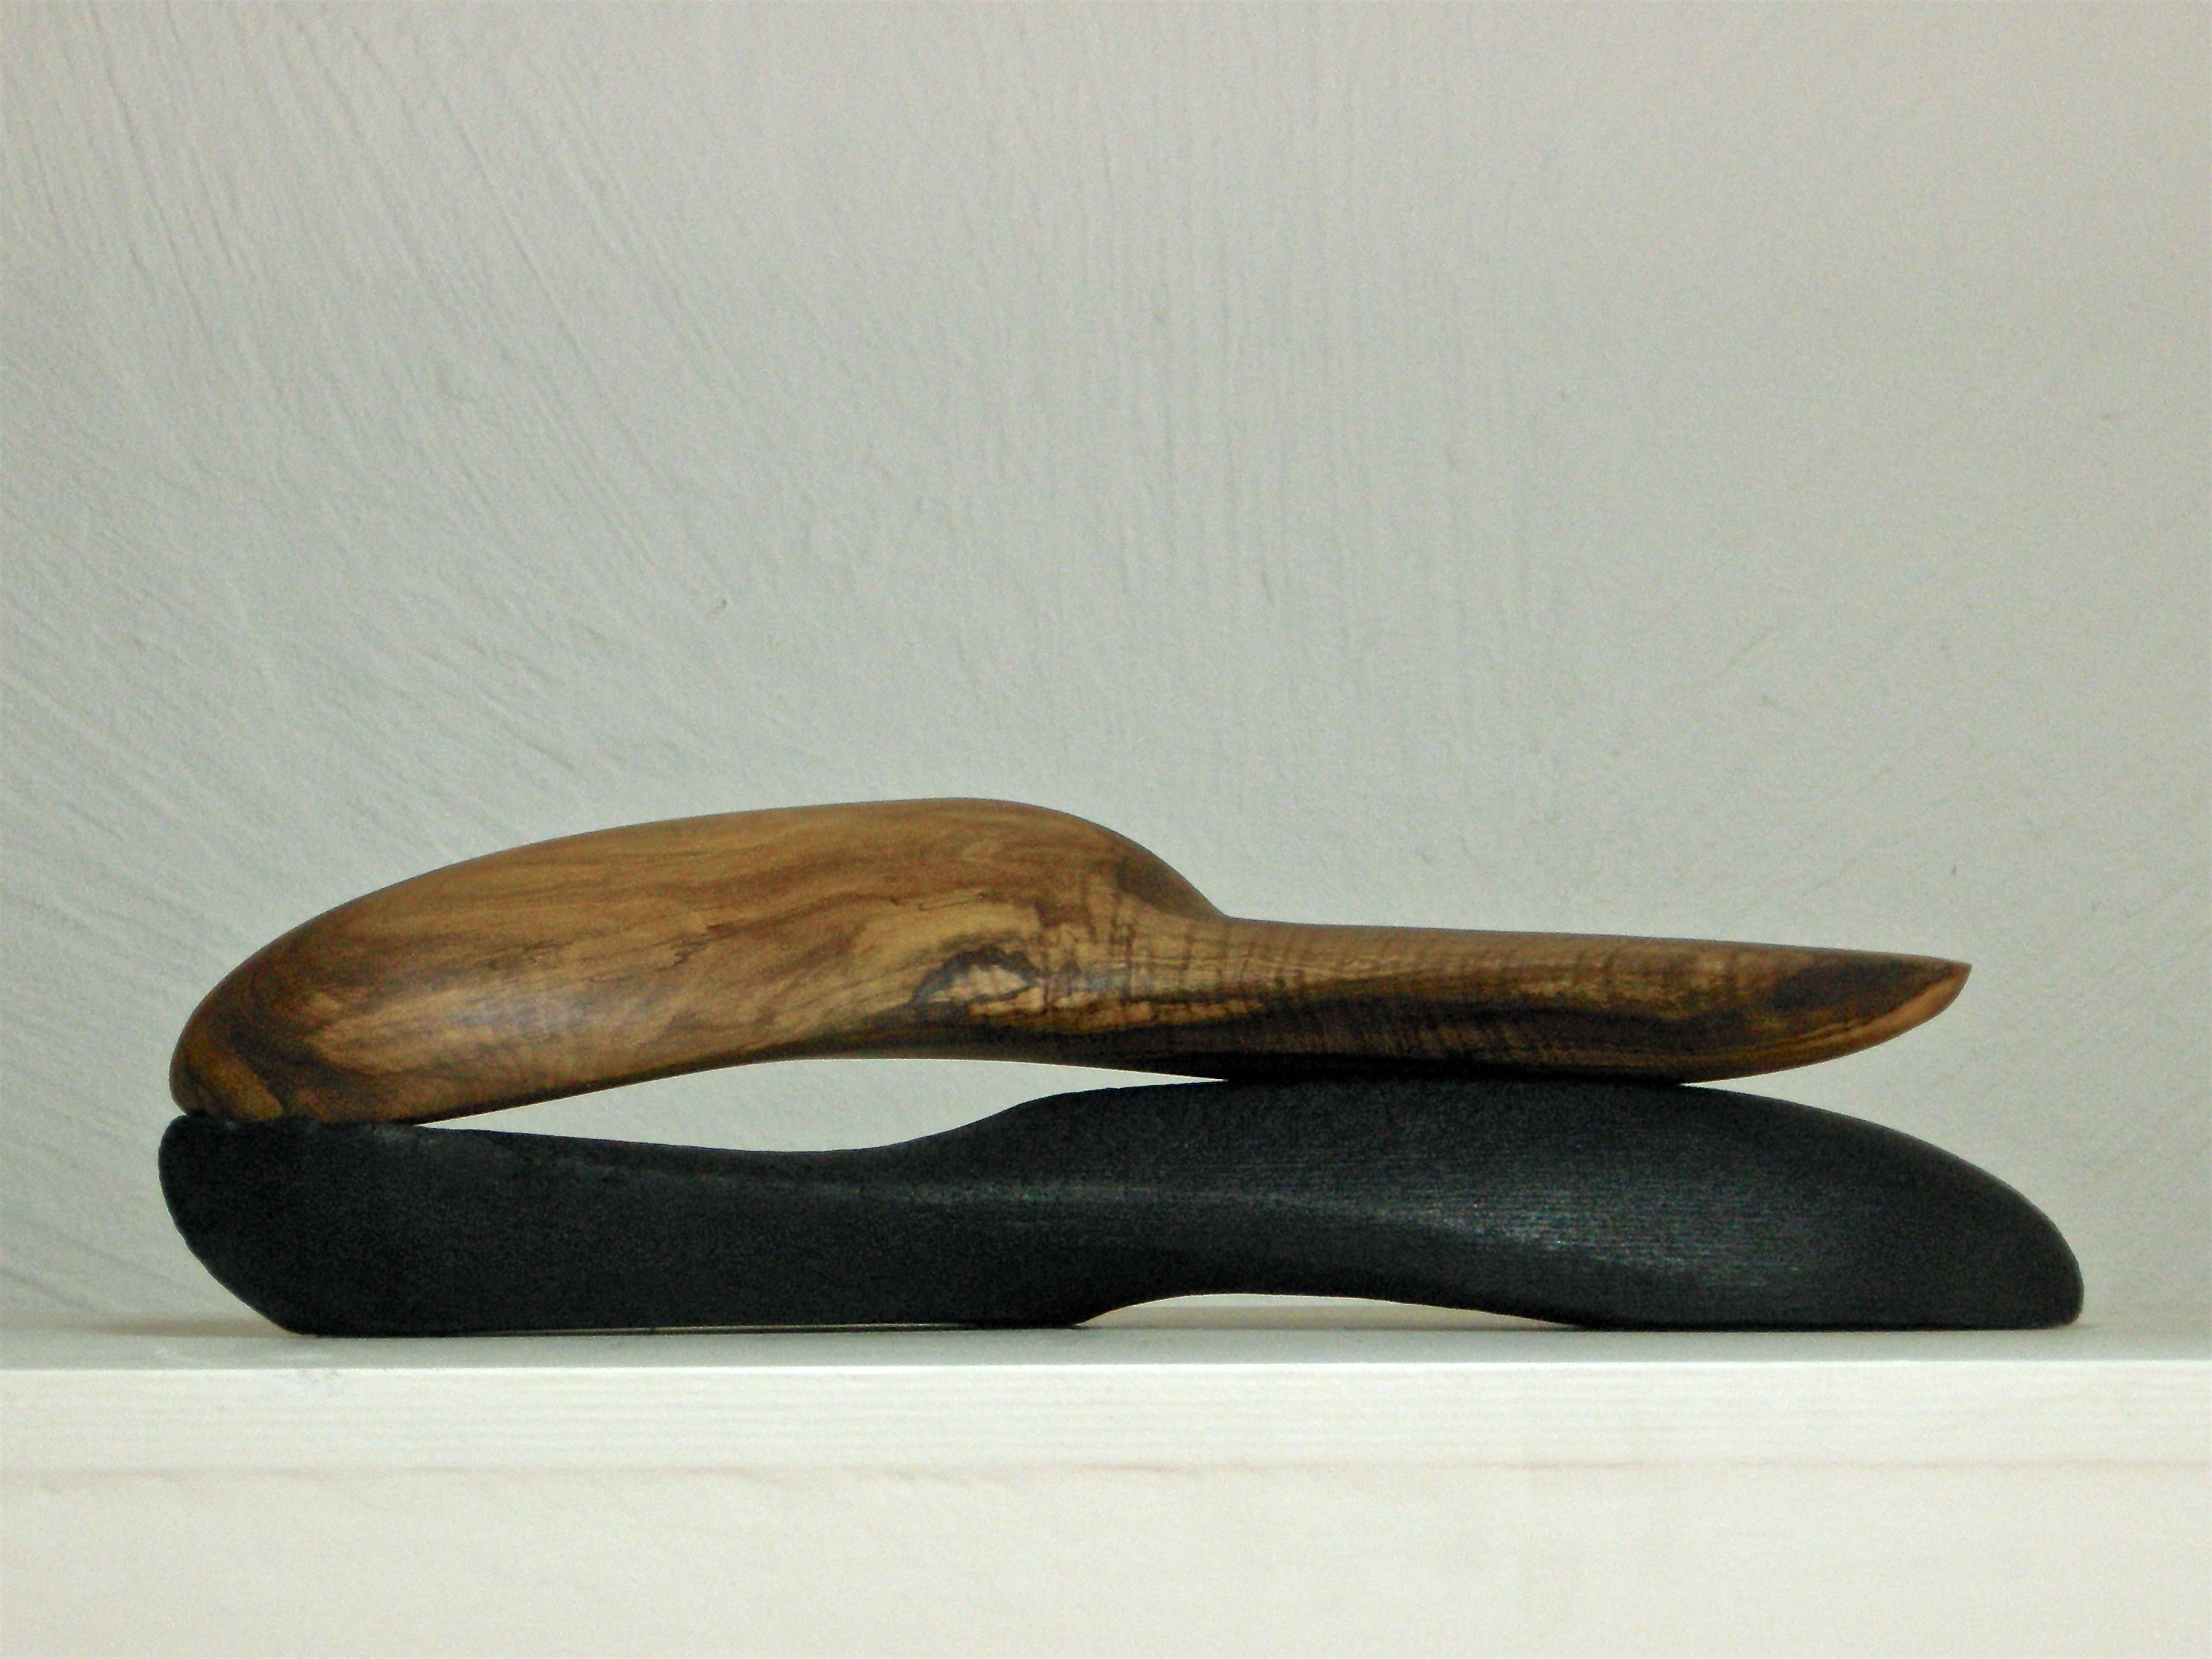 Counterparts 2019, Olive wood,  charred ash, length 35 cm